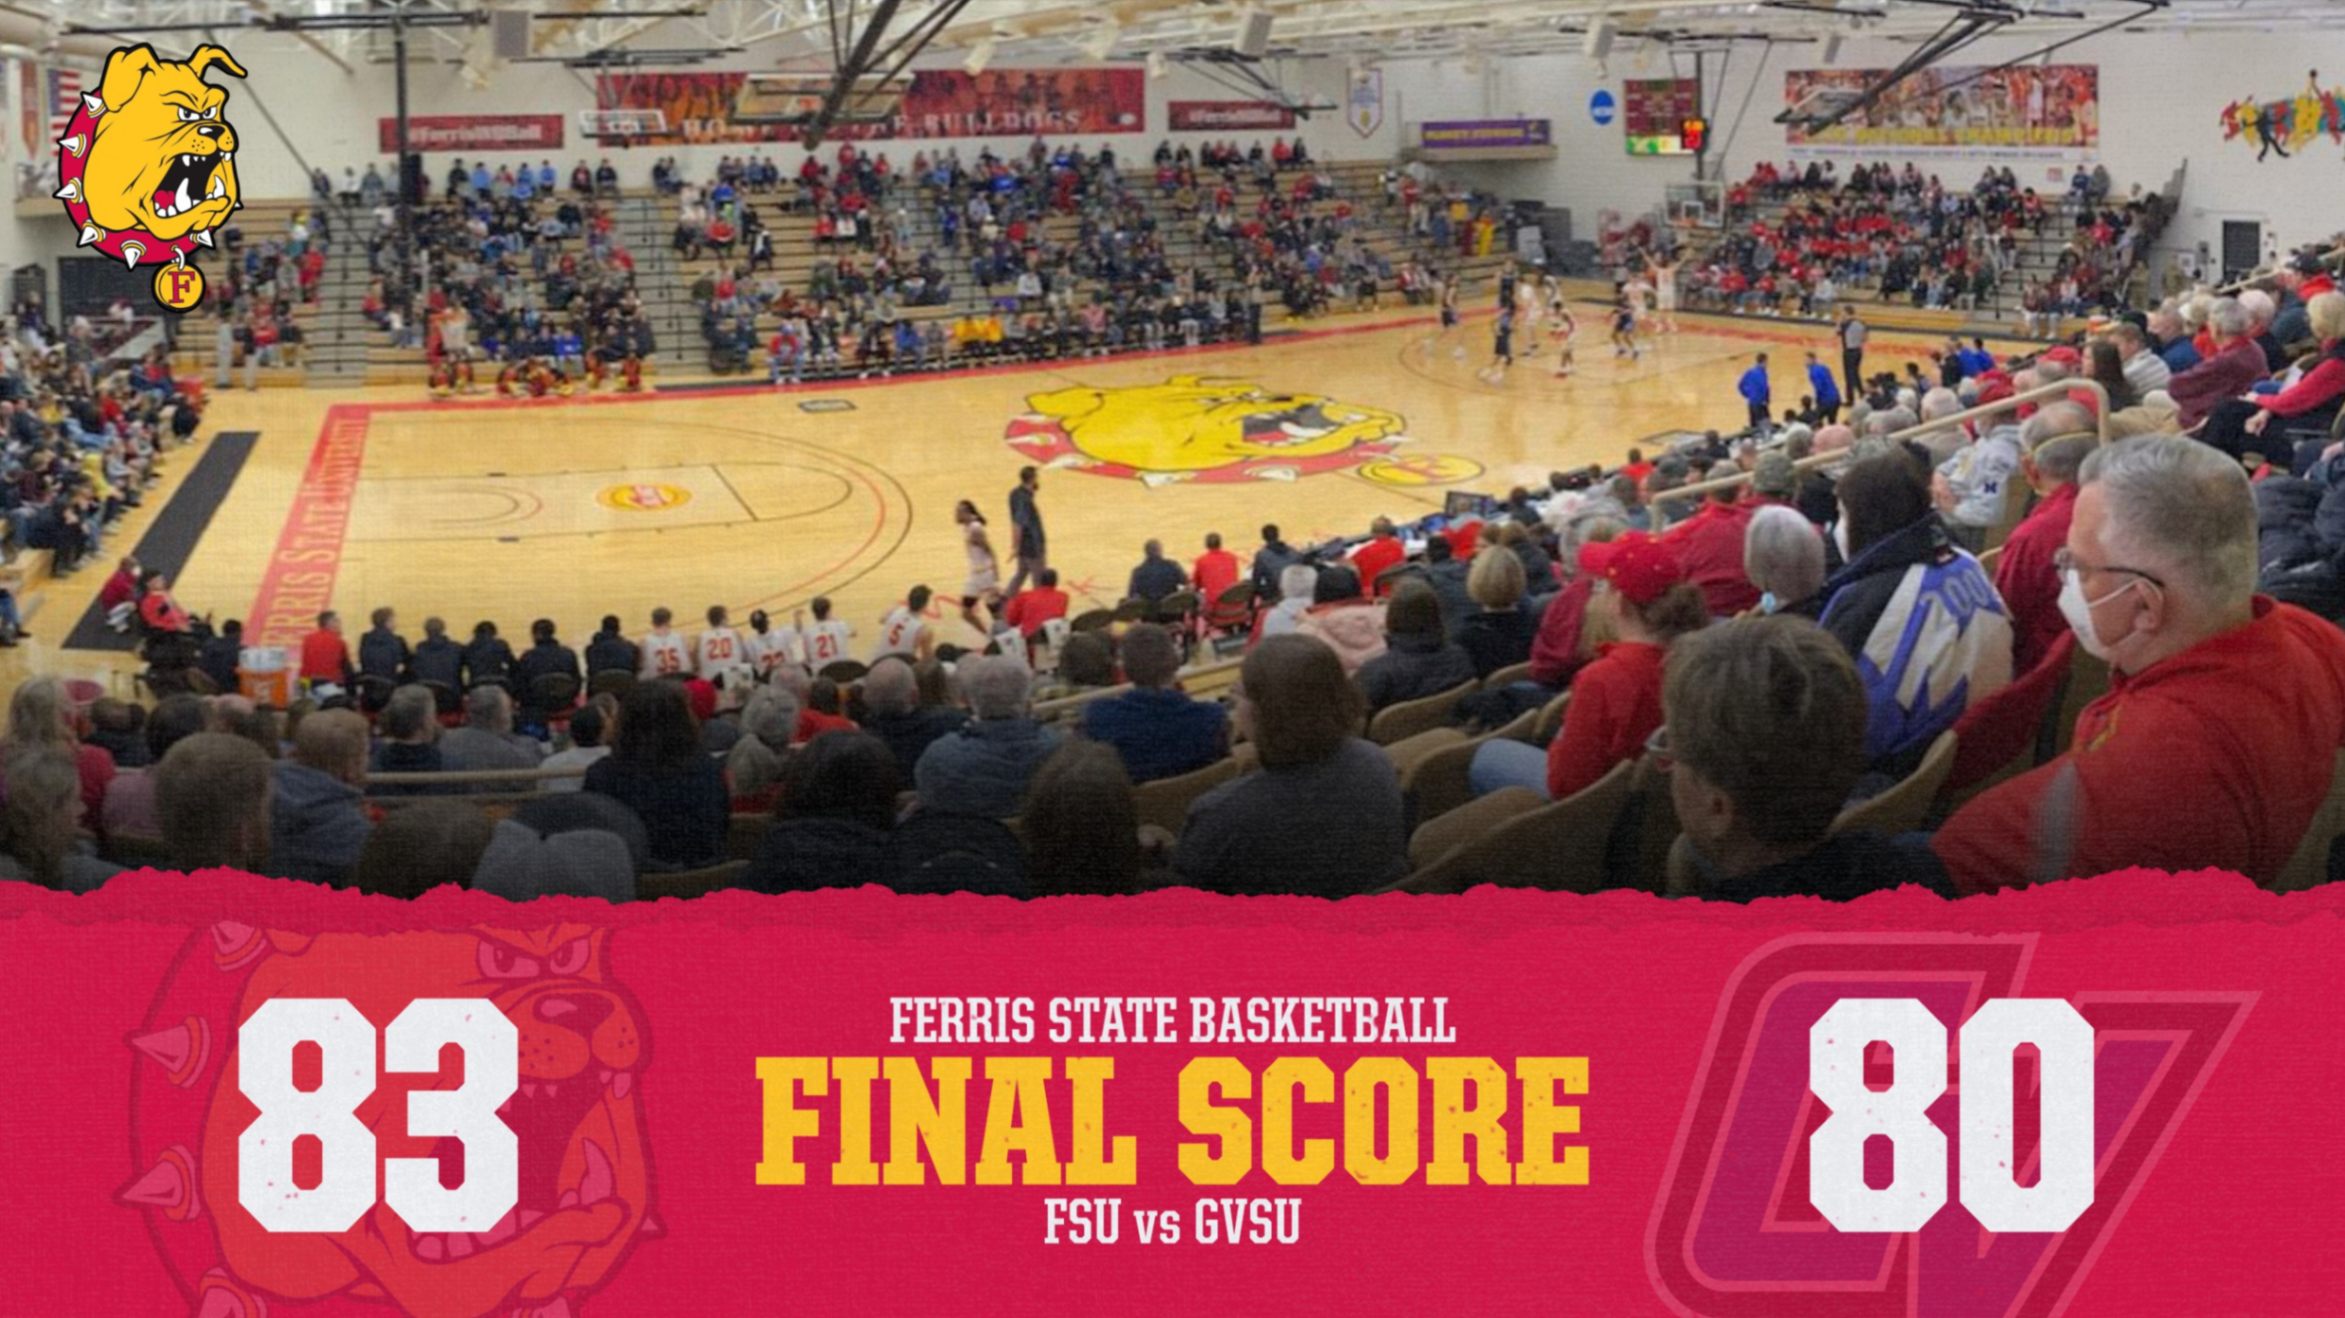 Ferris State Pulls Out Narrow Victory In Thrilling West Michigan Rivalry Game Over GVSU